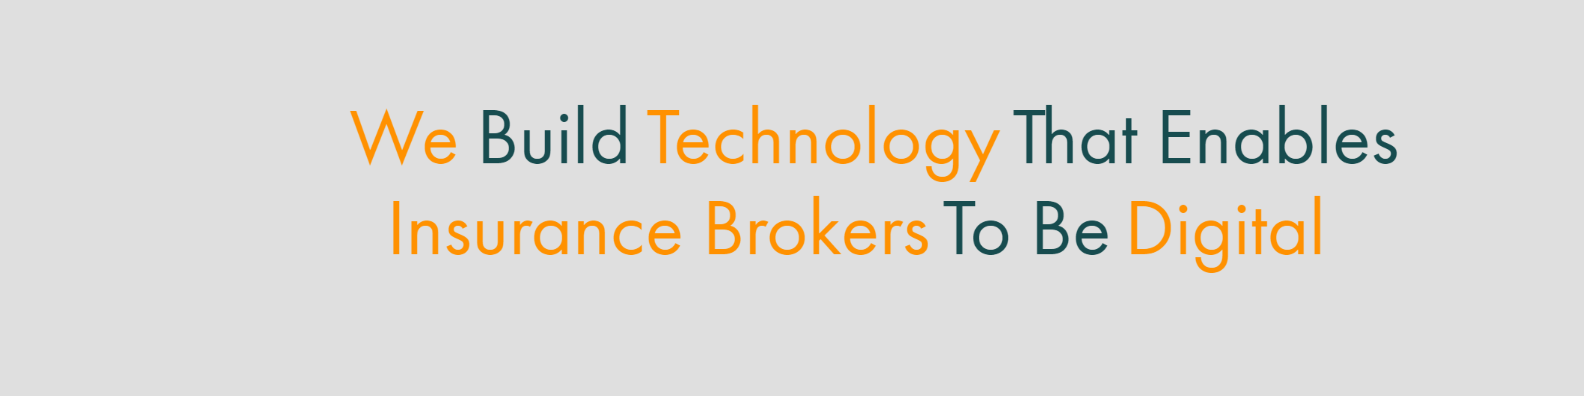 Brokit Baner - 'We build technology that enables insurance brokers to be digital